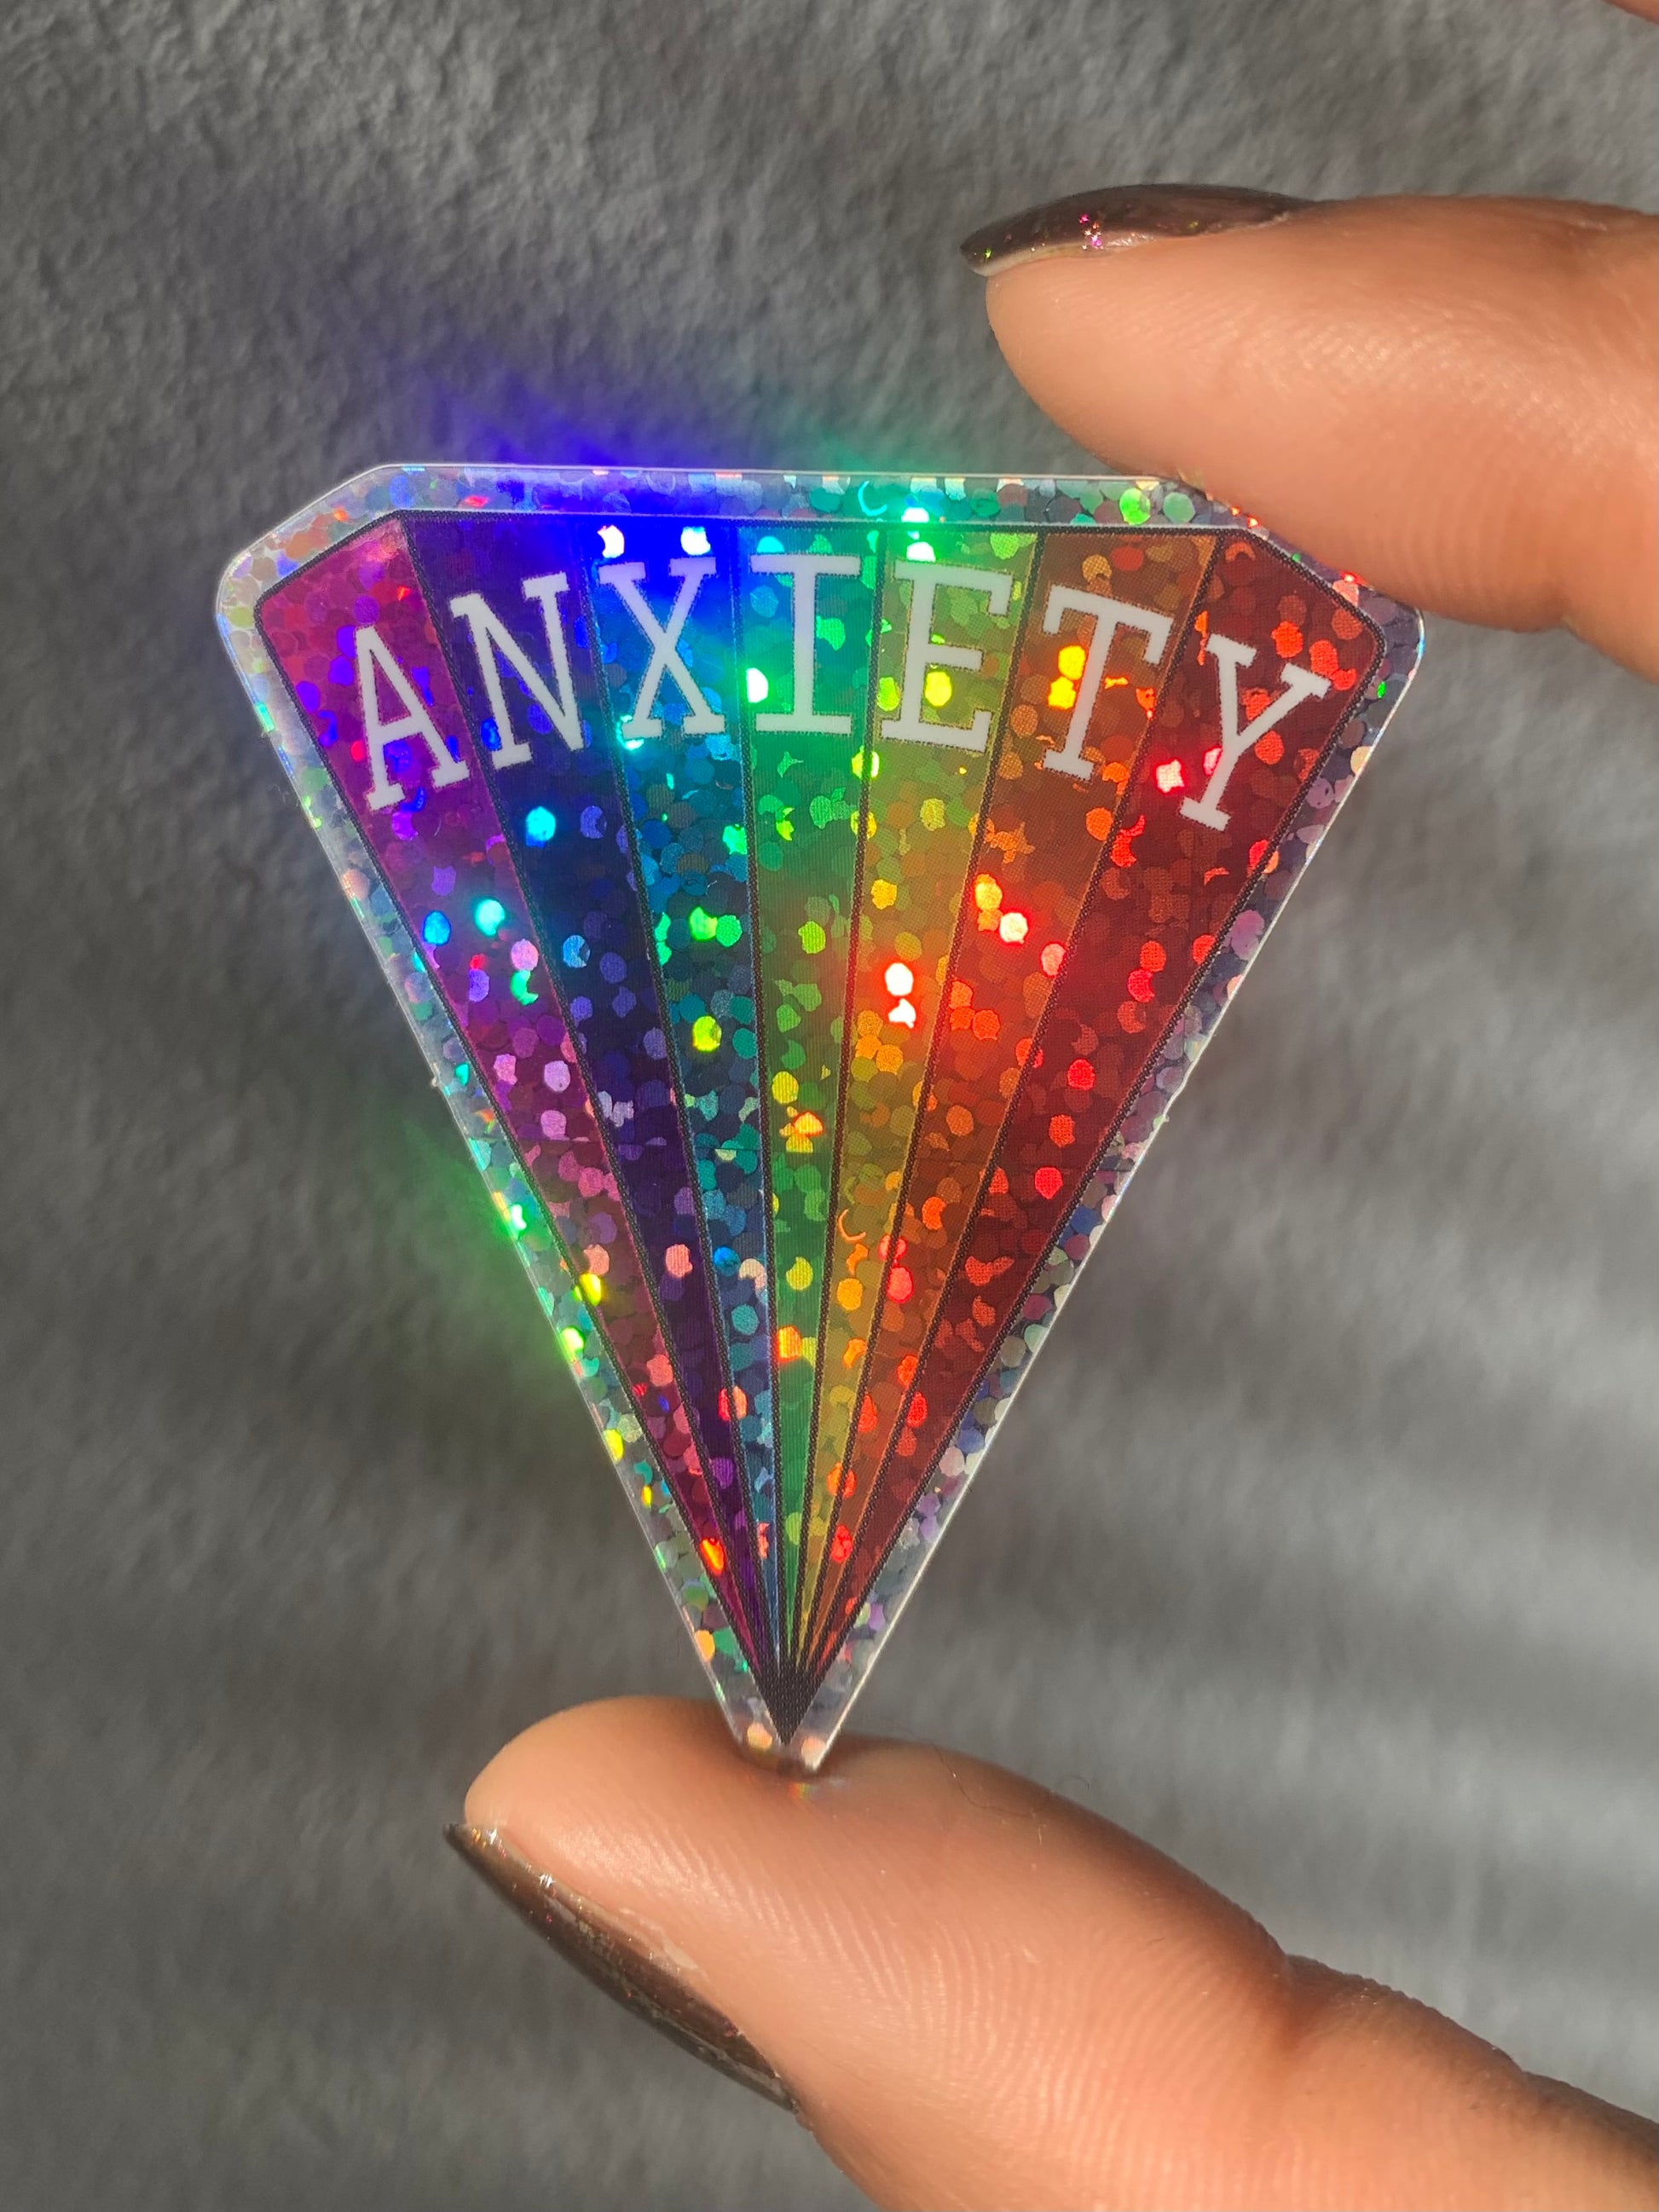 Triangular vinyl sticker with a rainbow design in glitter that reads ANXIETY across the top, measuring 2 x 1.8 inches being held between two fingers.